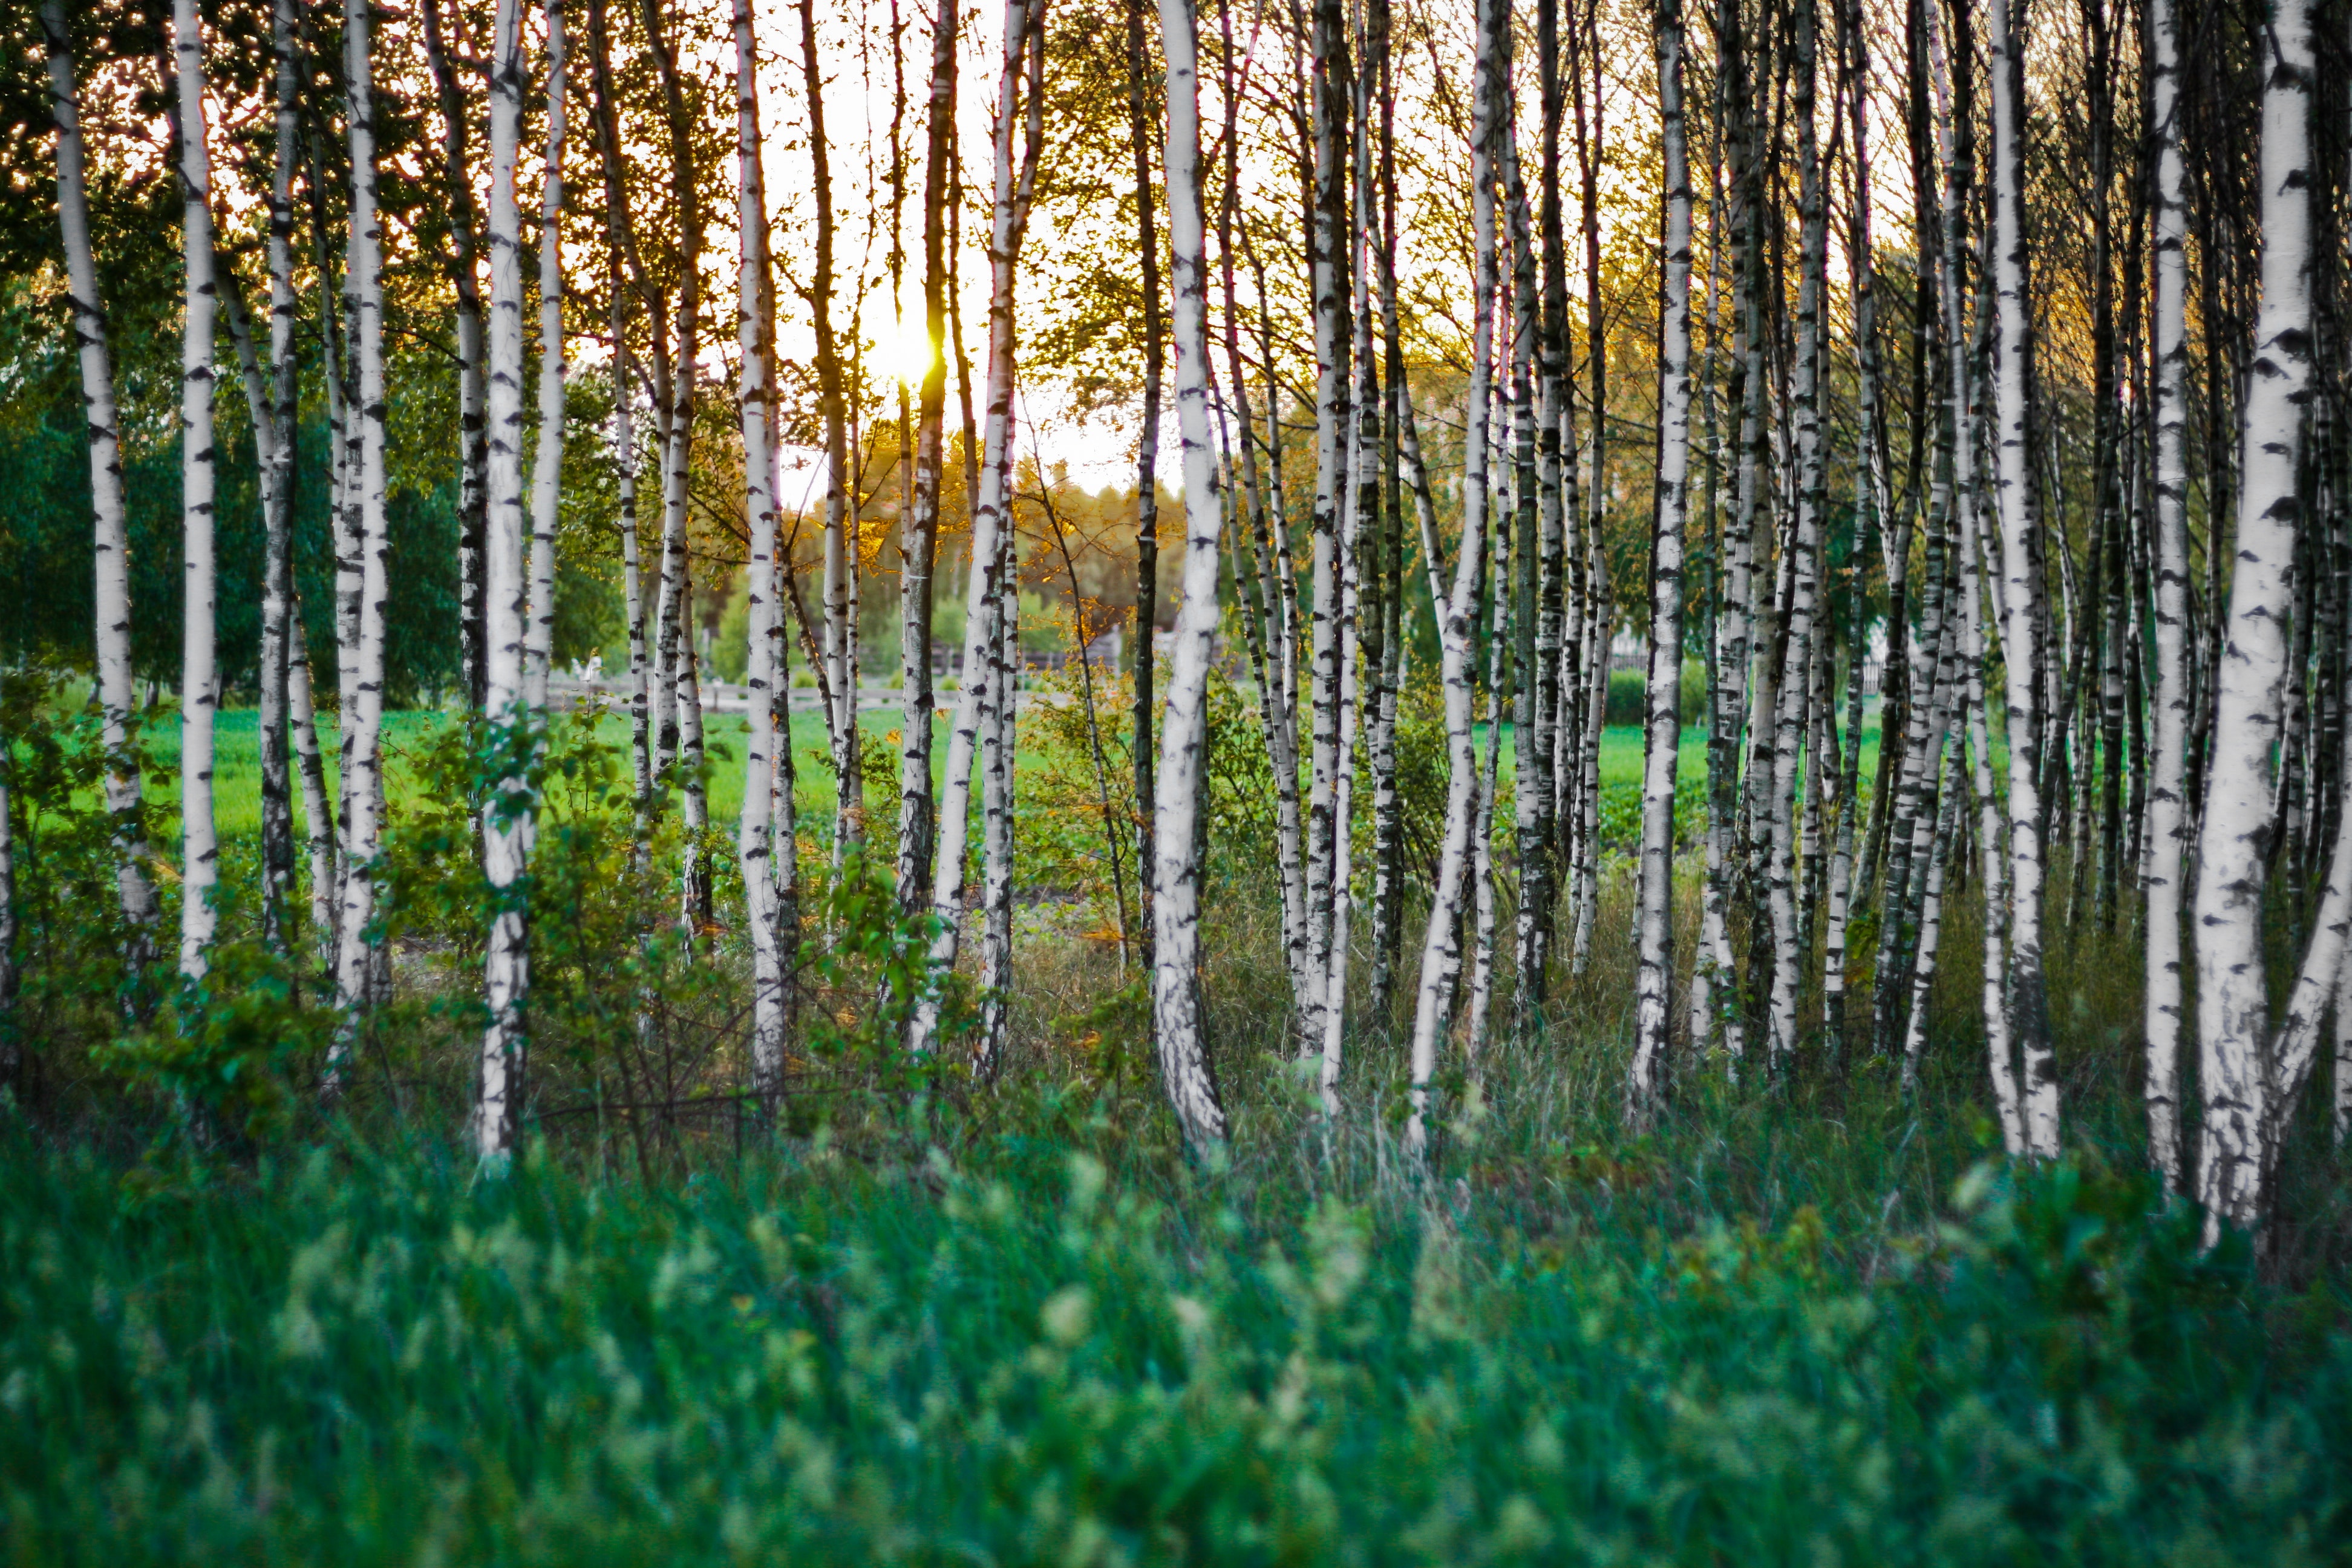 Birch forest, Birch, Outdoors, Wood, Trees, HQ Photo